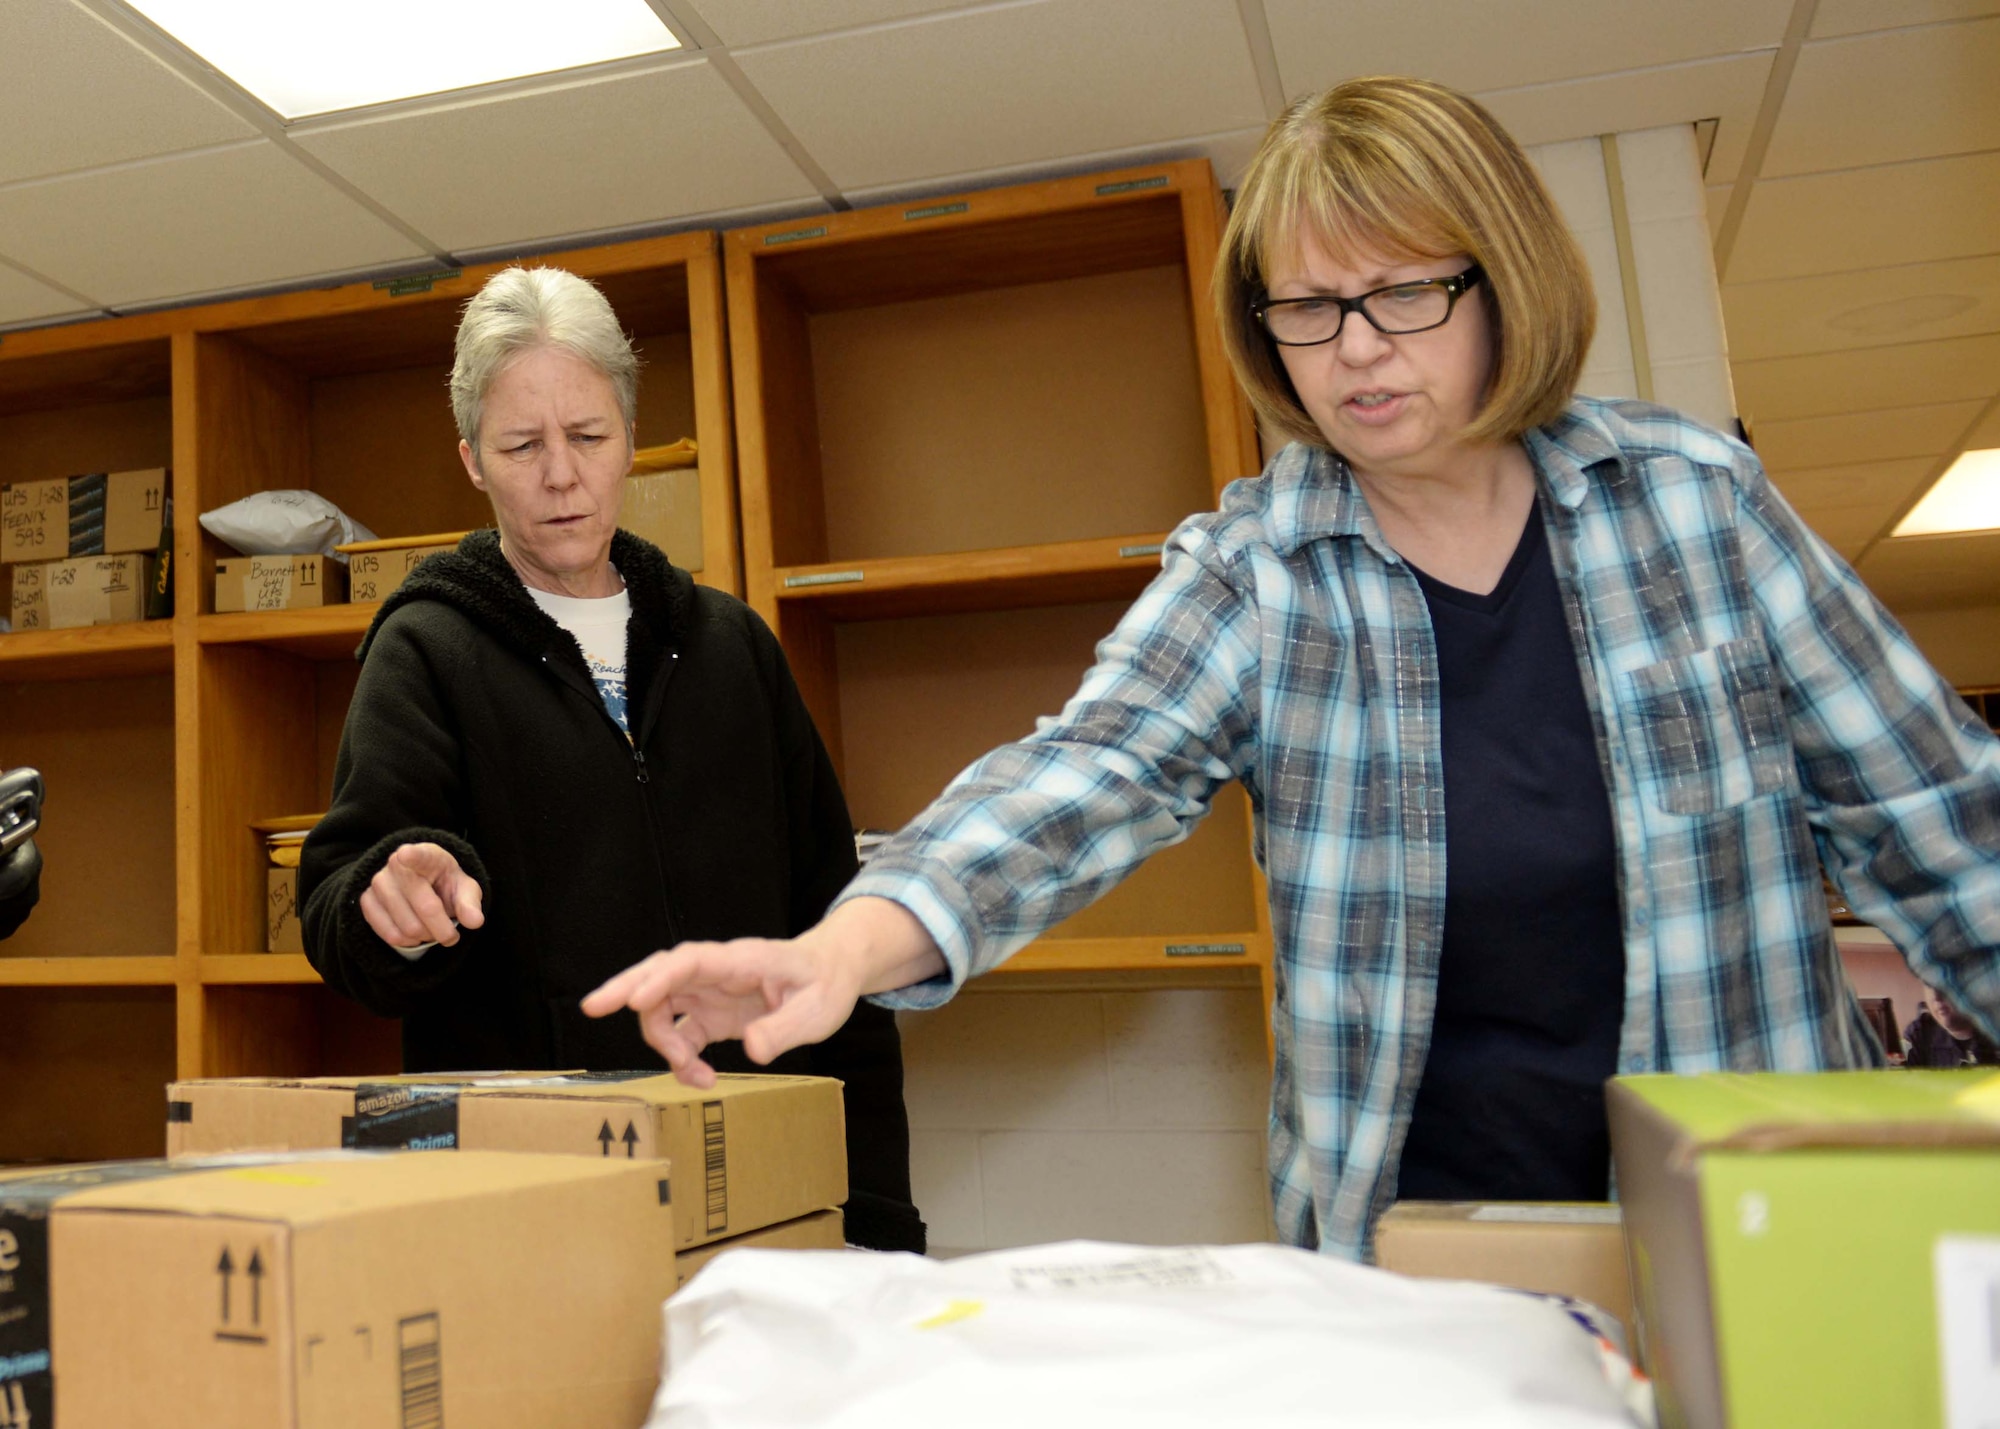 Lori Steever, 28th Communications Squadron postal service center manager (right), and Renee Griffith, 28th CS PSC clerk, organize packages at the Postal Service Center at Ellsworth Air Force Base, S.D., Jan. 28, 2015. Ellsworth’s PSC is run by Lori Steever, Griffith and Darla Steever, 28th CS PSC clerk, who work year-round delivering mail to dorm Airmen. (U.S. Air Force photo by Airman 1st Class Rebecca Imwalle/Released)